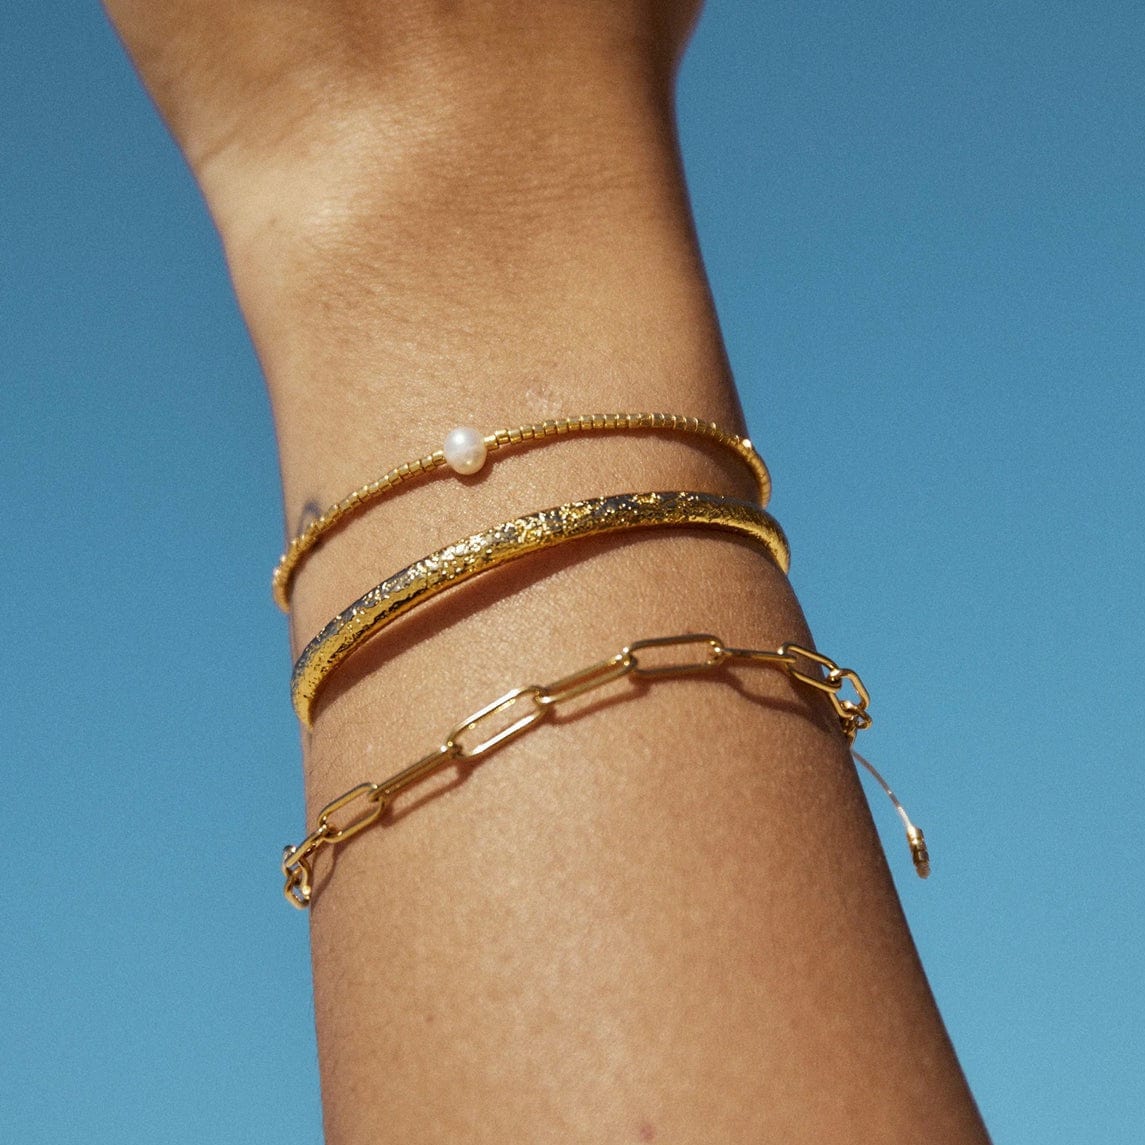 River Gold + Pearl Bracelet by Arms of Eve